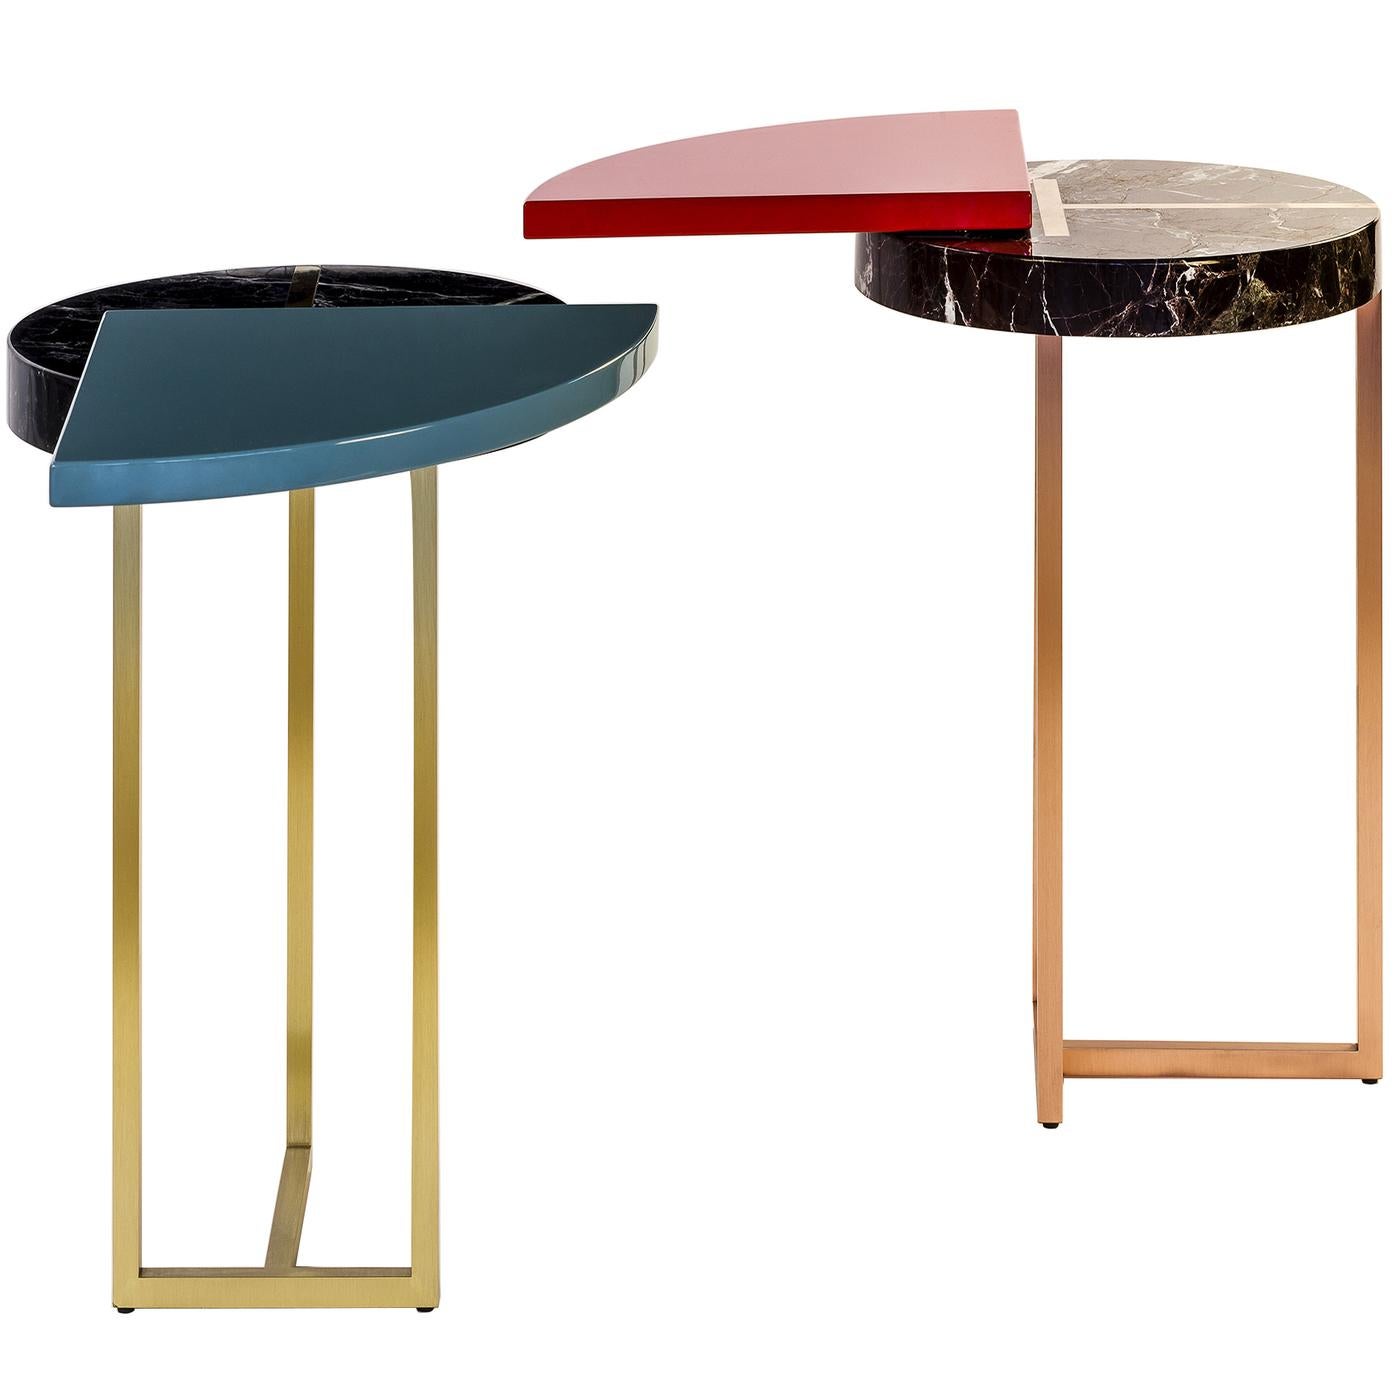 With a simple and harmonious aesthetic, the blue wing end table is a contemporary piece that juxtaposes shapes with the sumptuous Rosso Lepanto marble to create a new classic. A vertical pivot allows the rotation of the lacquered wood, creating an